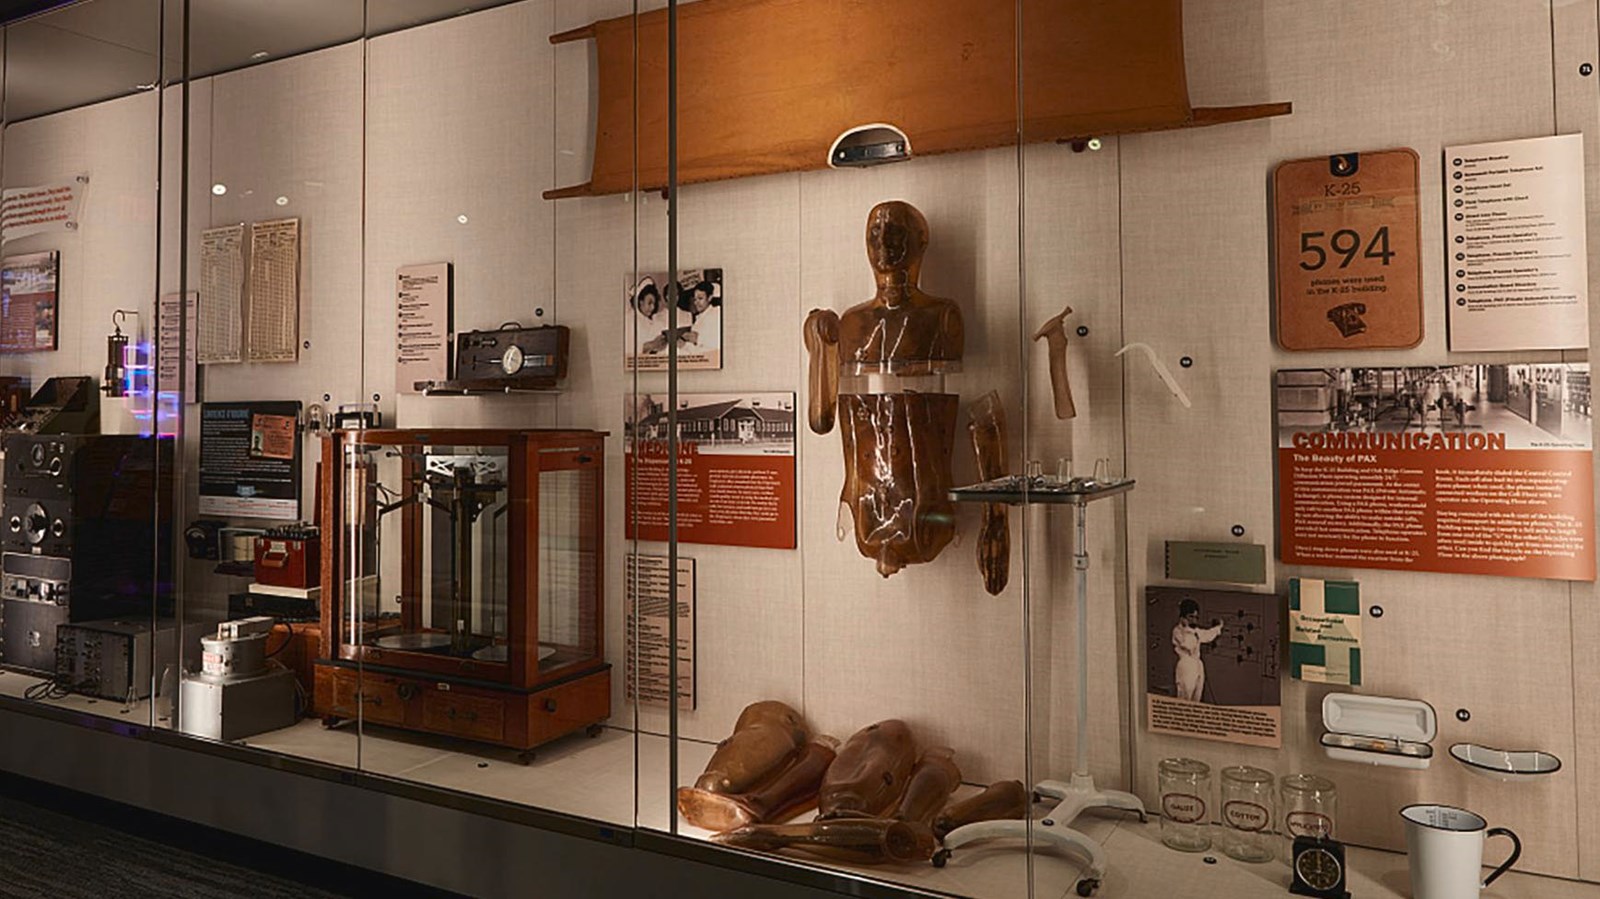 A stretcher, manniquen, medical, and scientific equipment displayed in glass cases along a wall